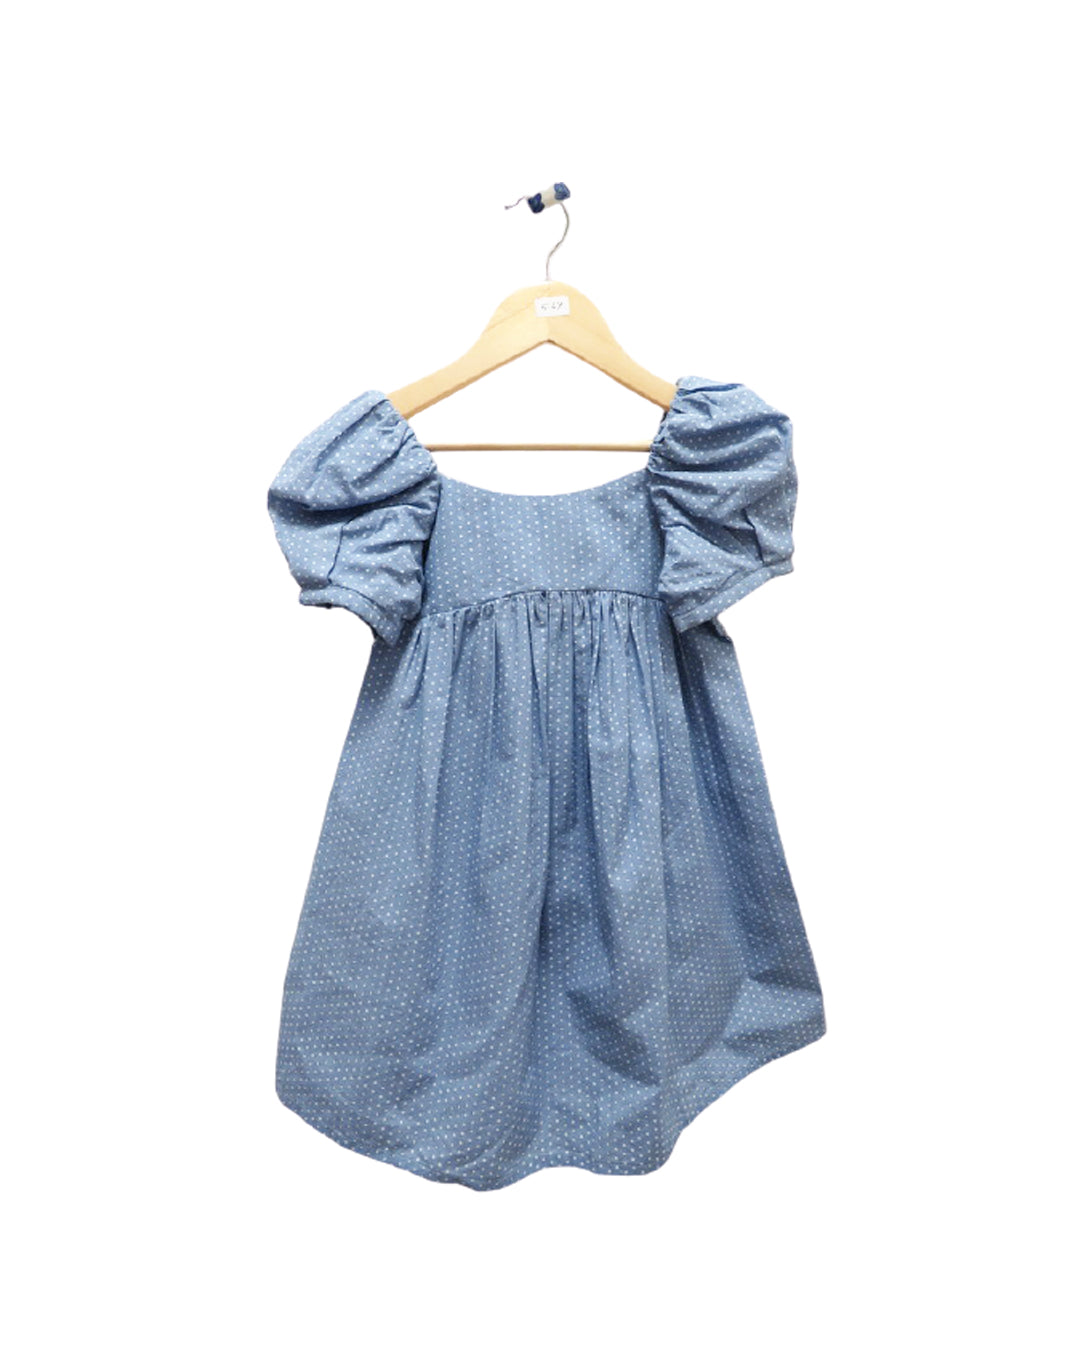 BLUE PUFFED SLEEVES DRESS WITH WHITE POLKA DOTS